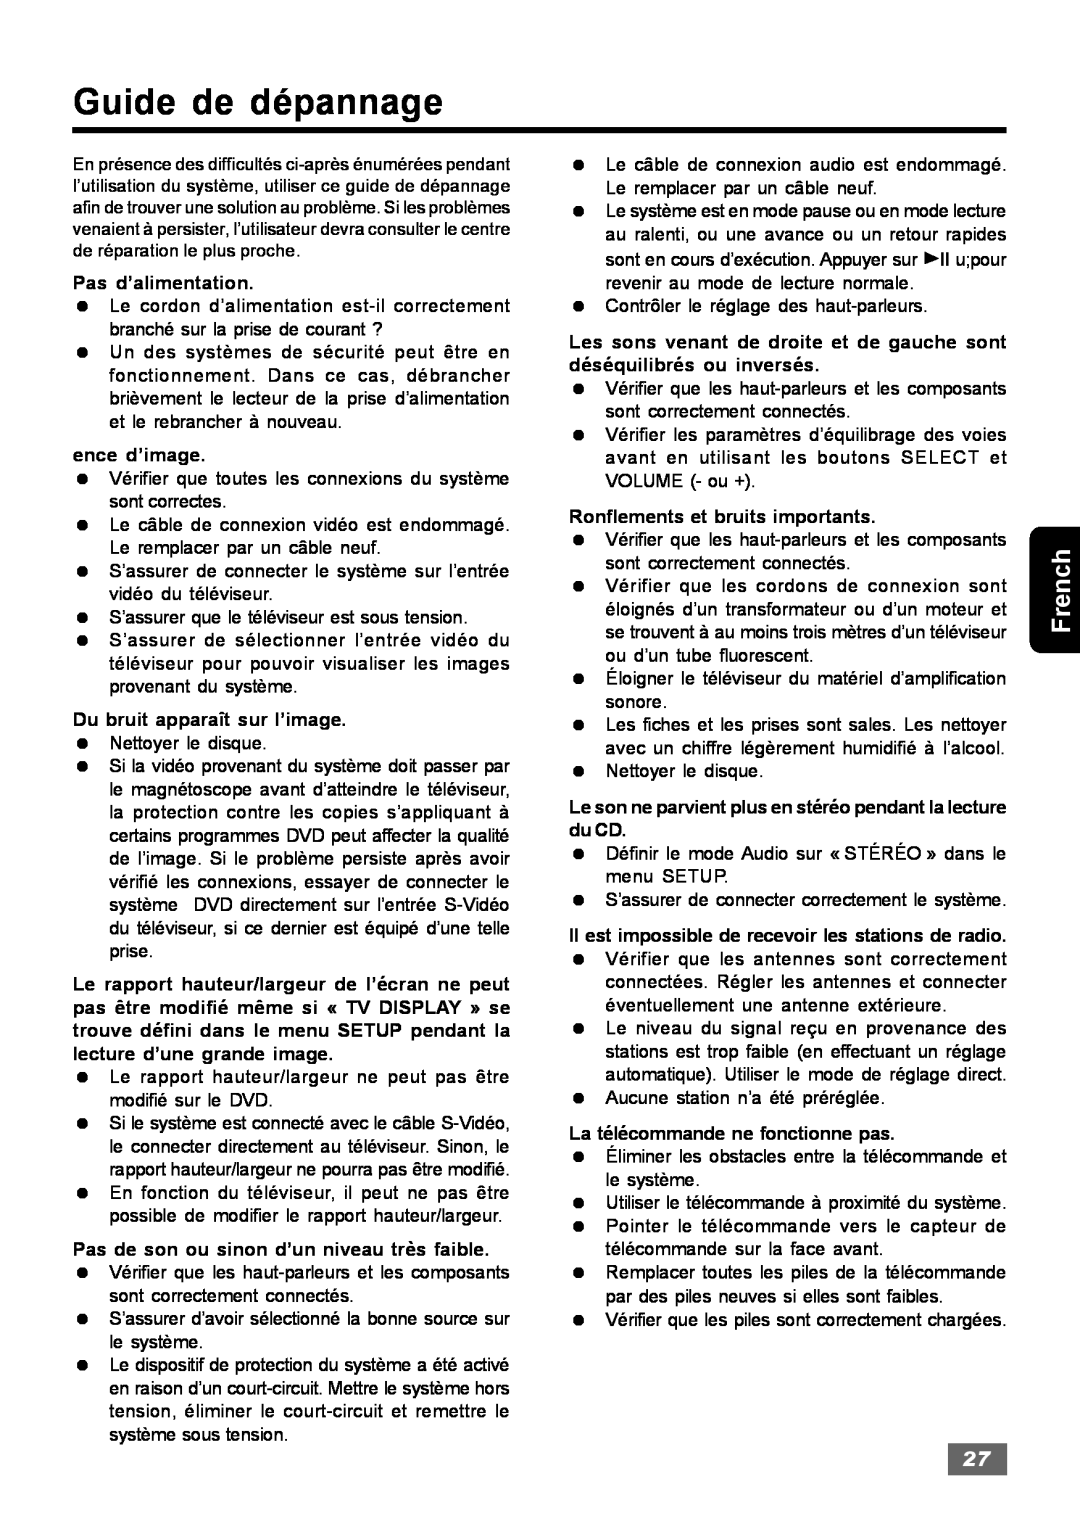 Insignia IS-HTIB102731 owner manual Guide de dépannage, French 